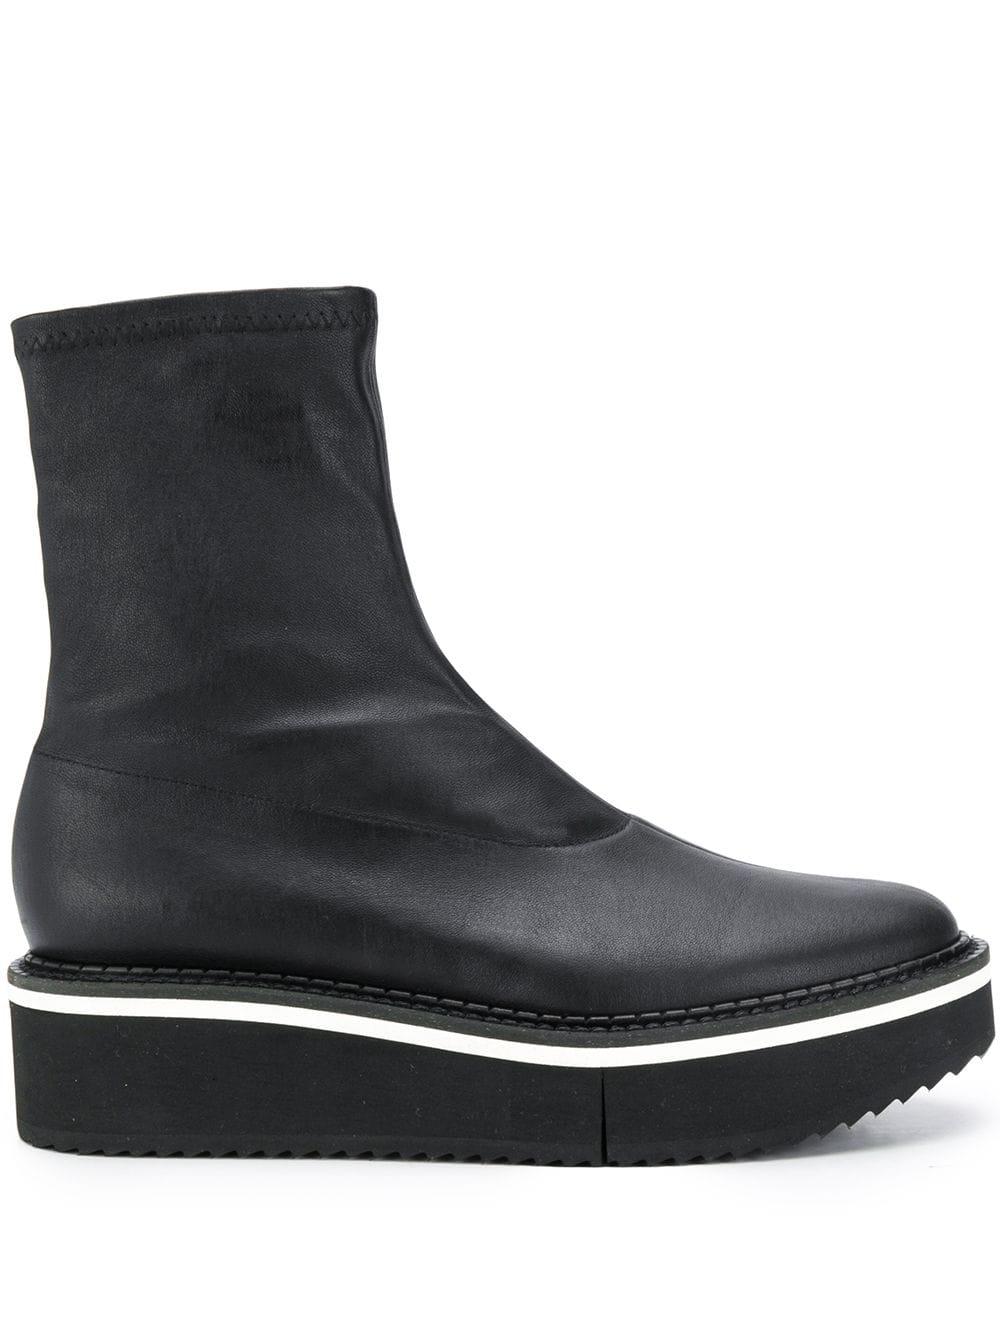 Clergerie Leather Berta Flatform Boots in Black - Lyst